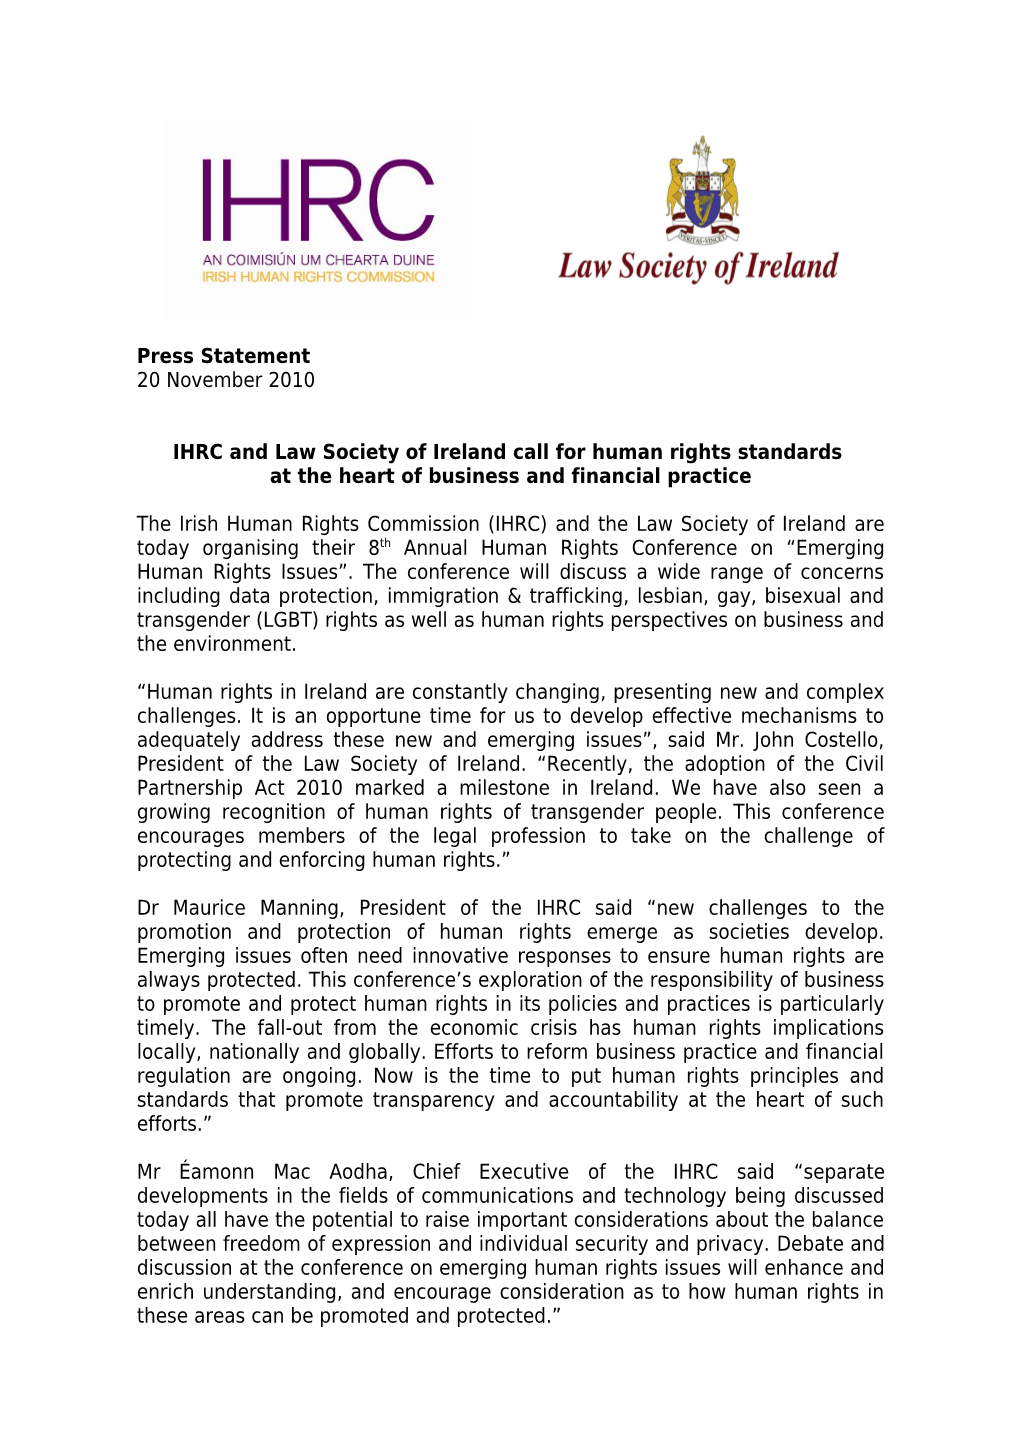 IHRC and Law Society of Ireland Call for Human Rights Standards